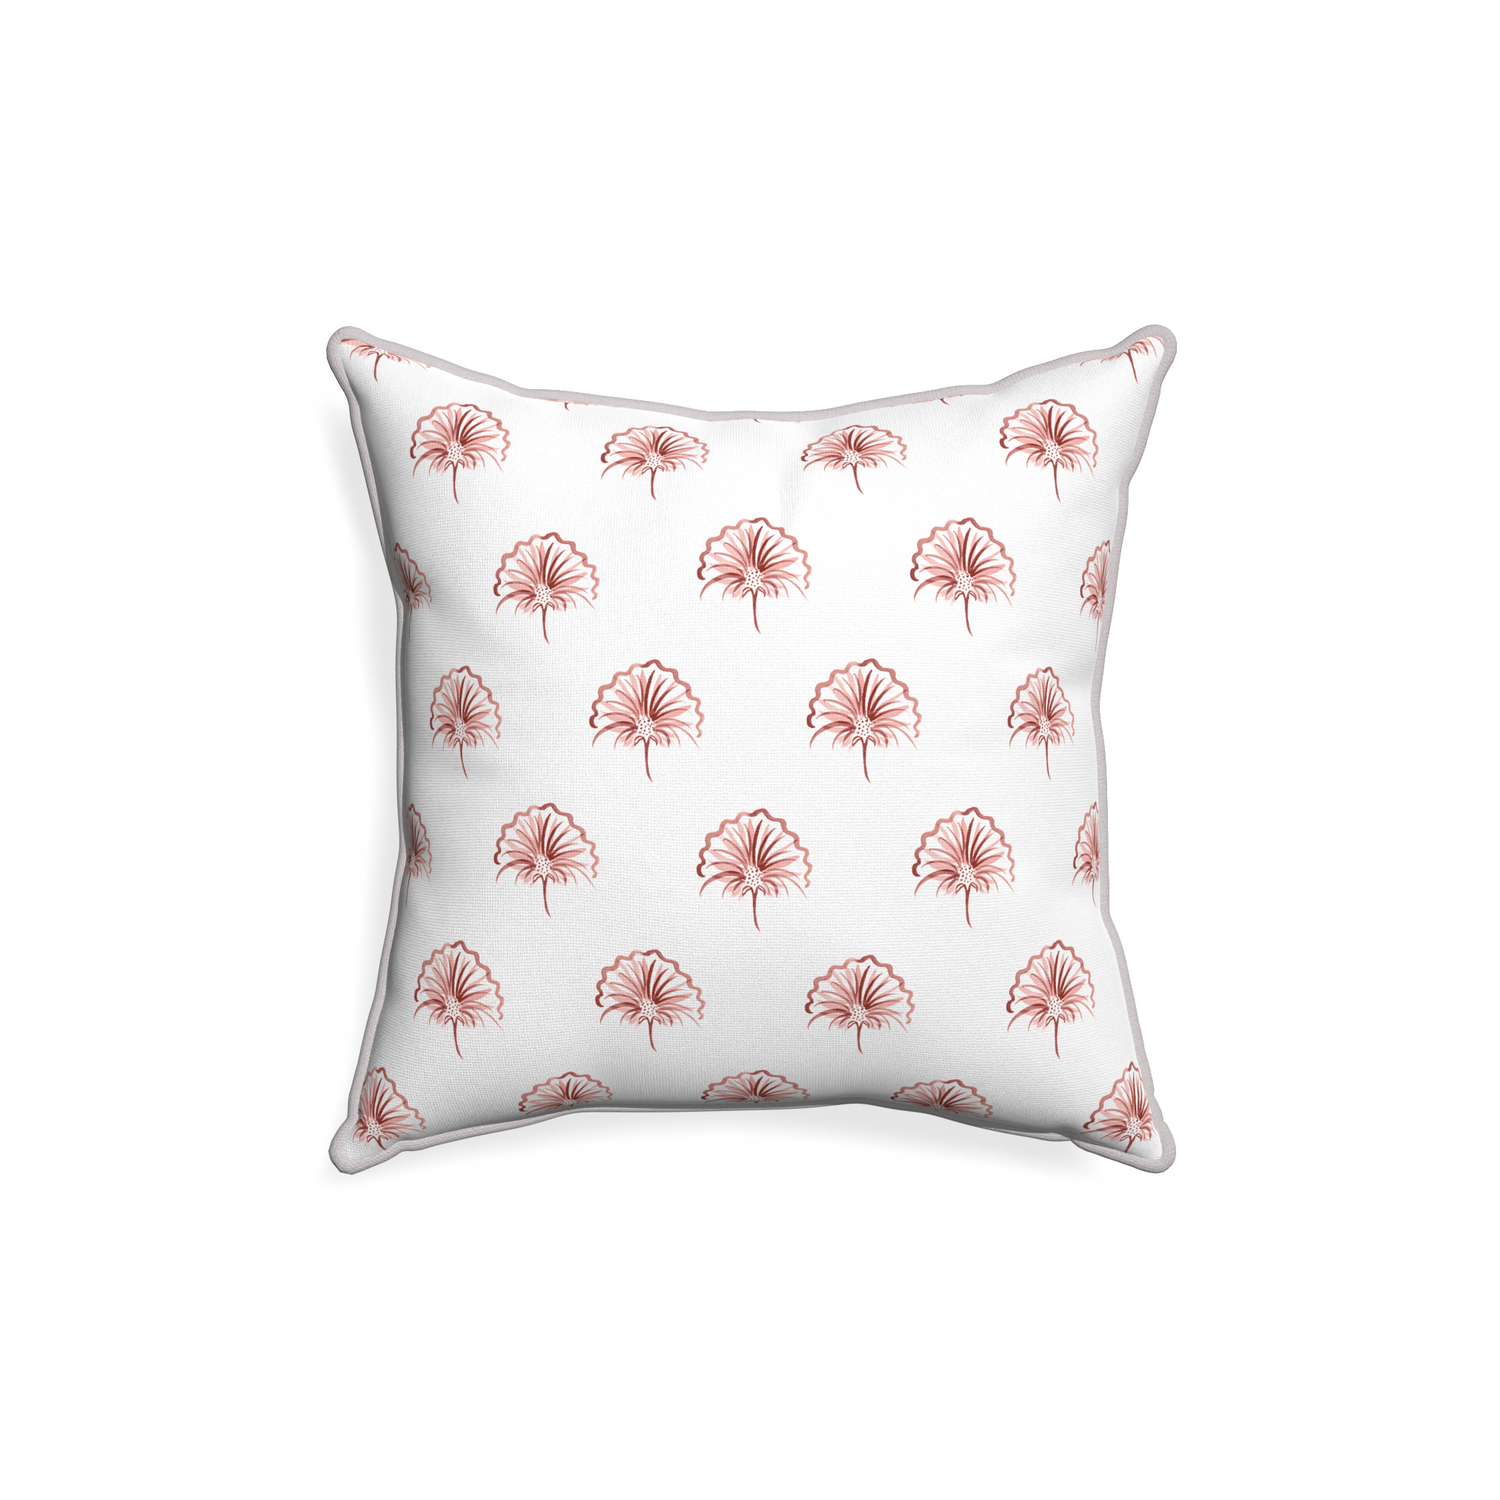 18-square penelope rose custom floral pinkpillow with pebble piping on white background